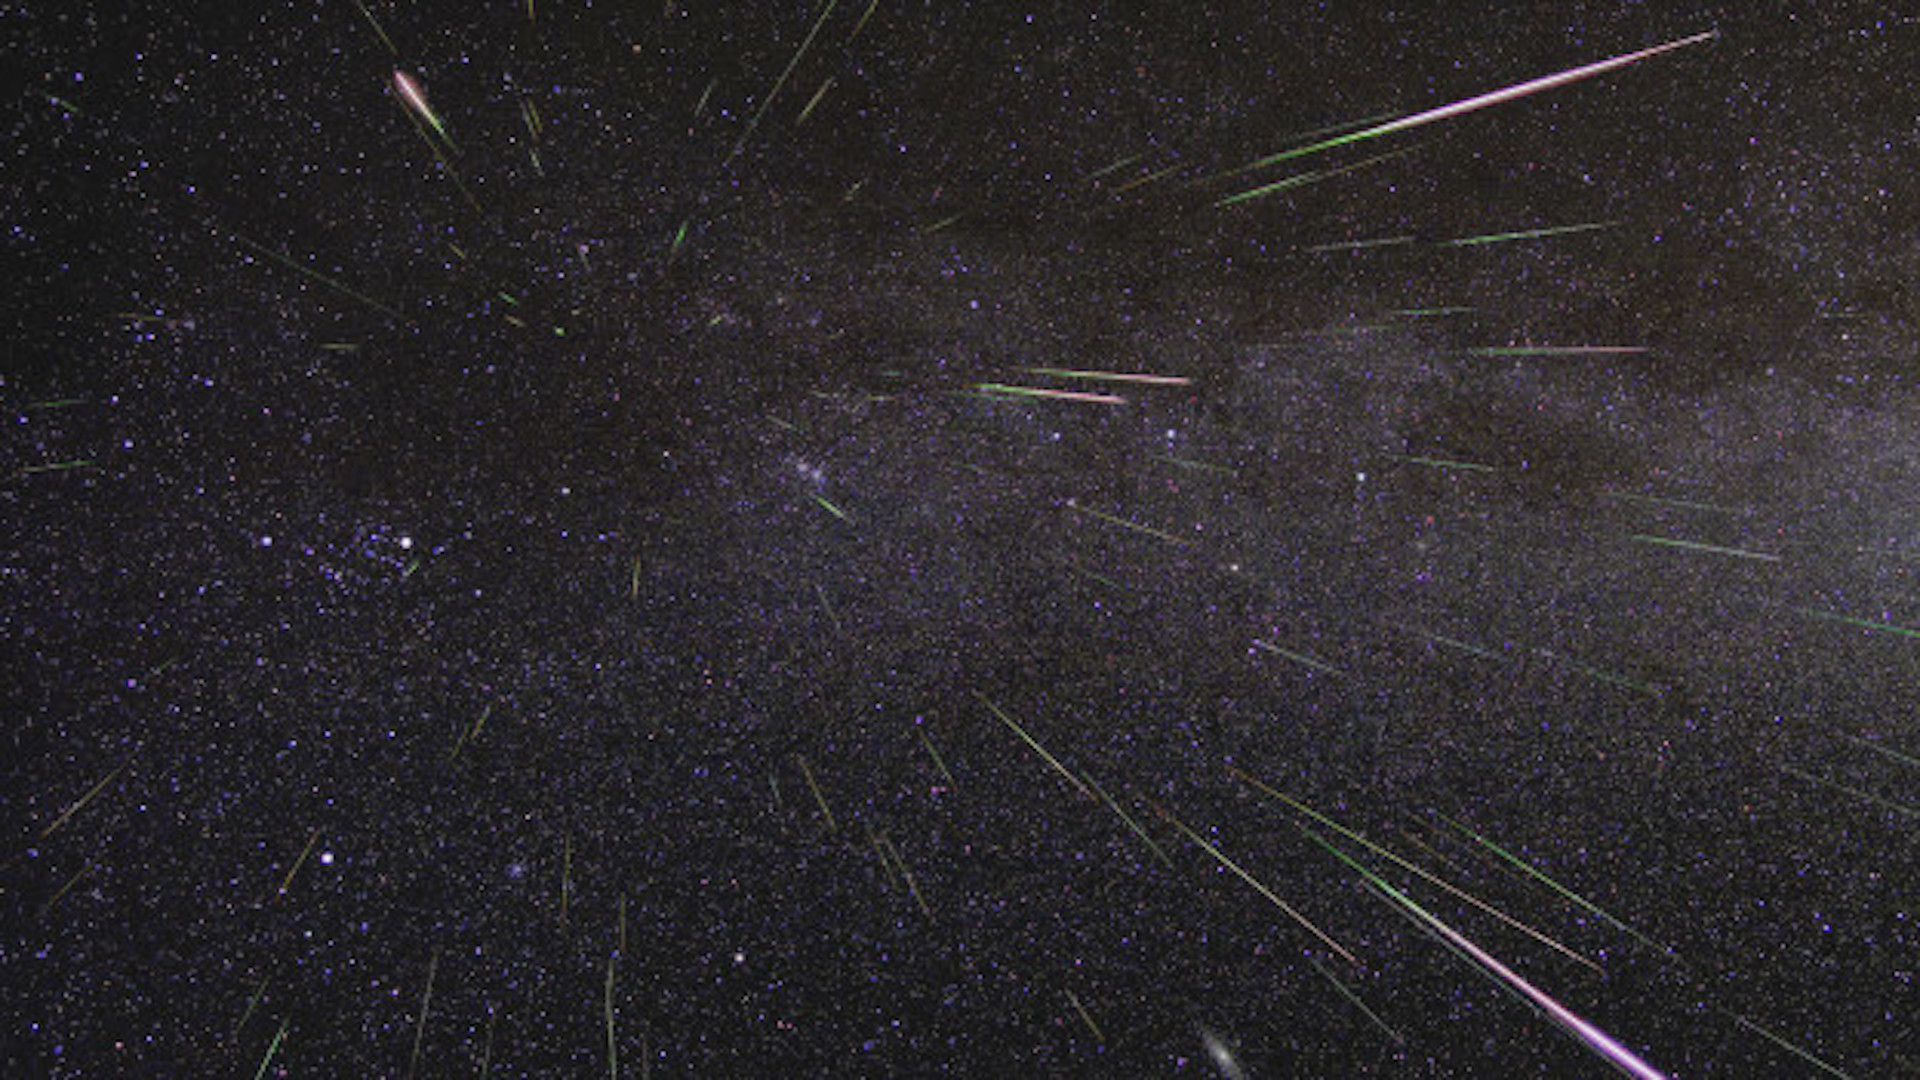 A time lapse of meteors streaking through the sky.